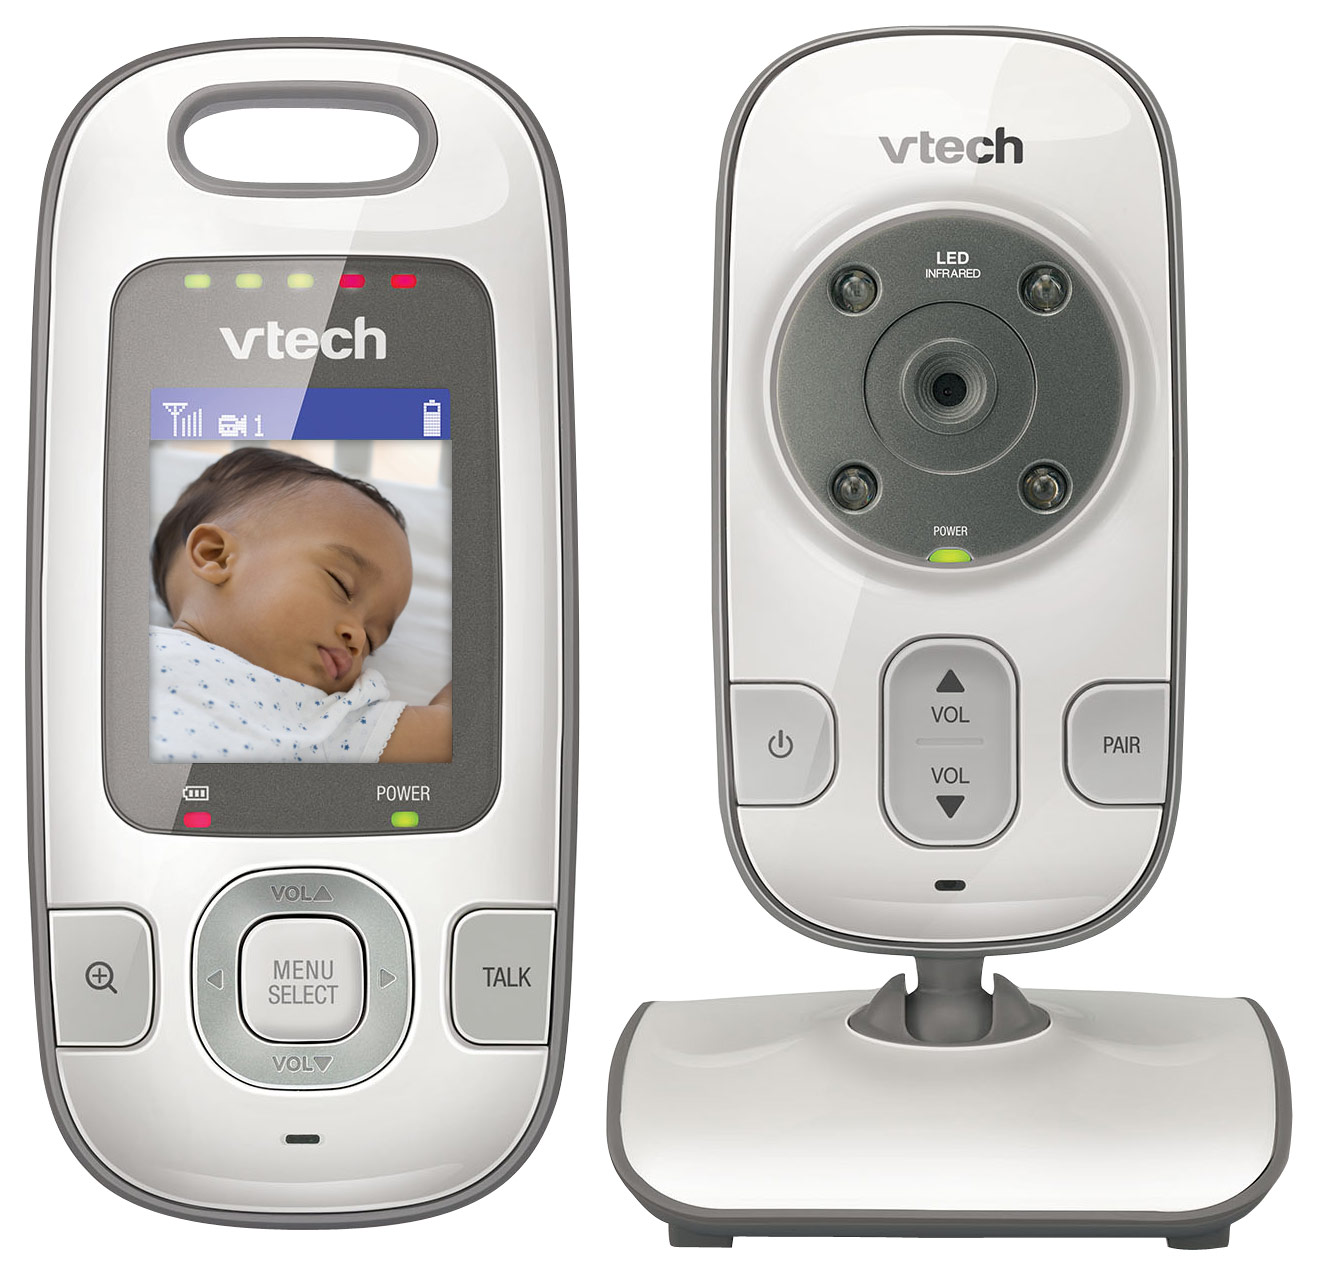 Questions and Answers: VTech VM312 